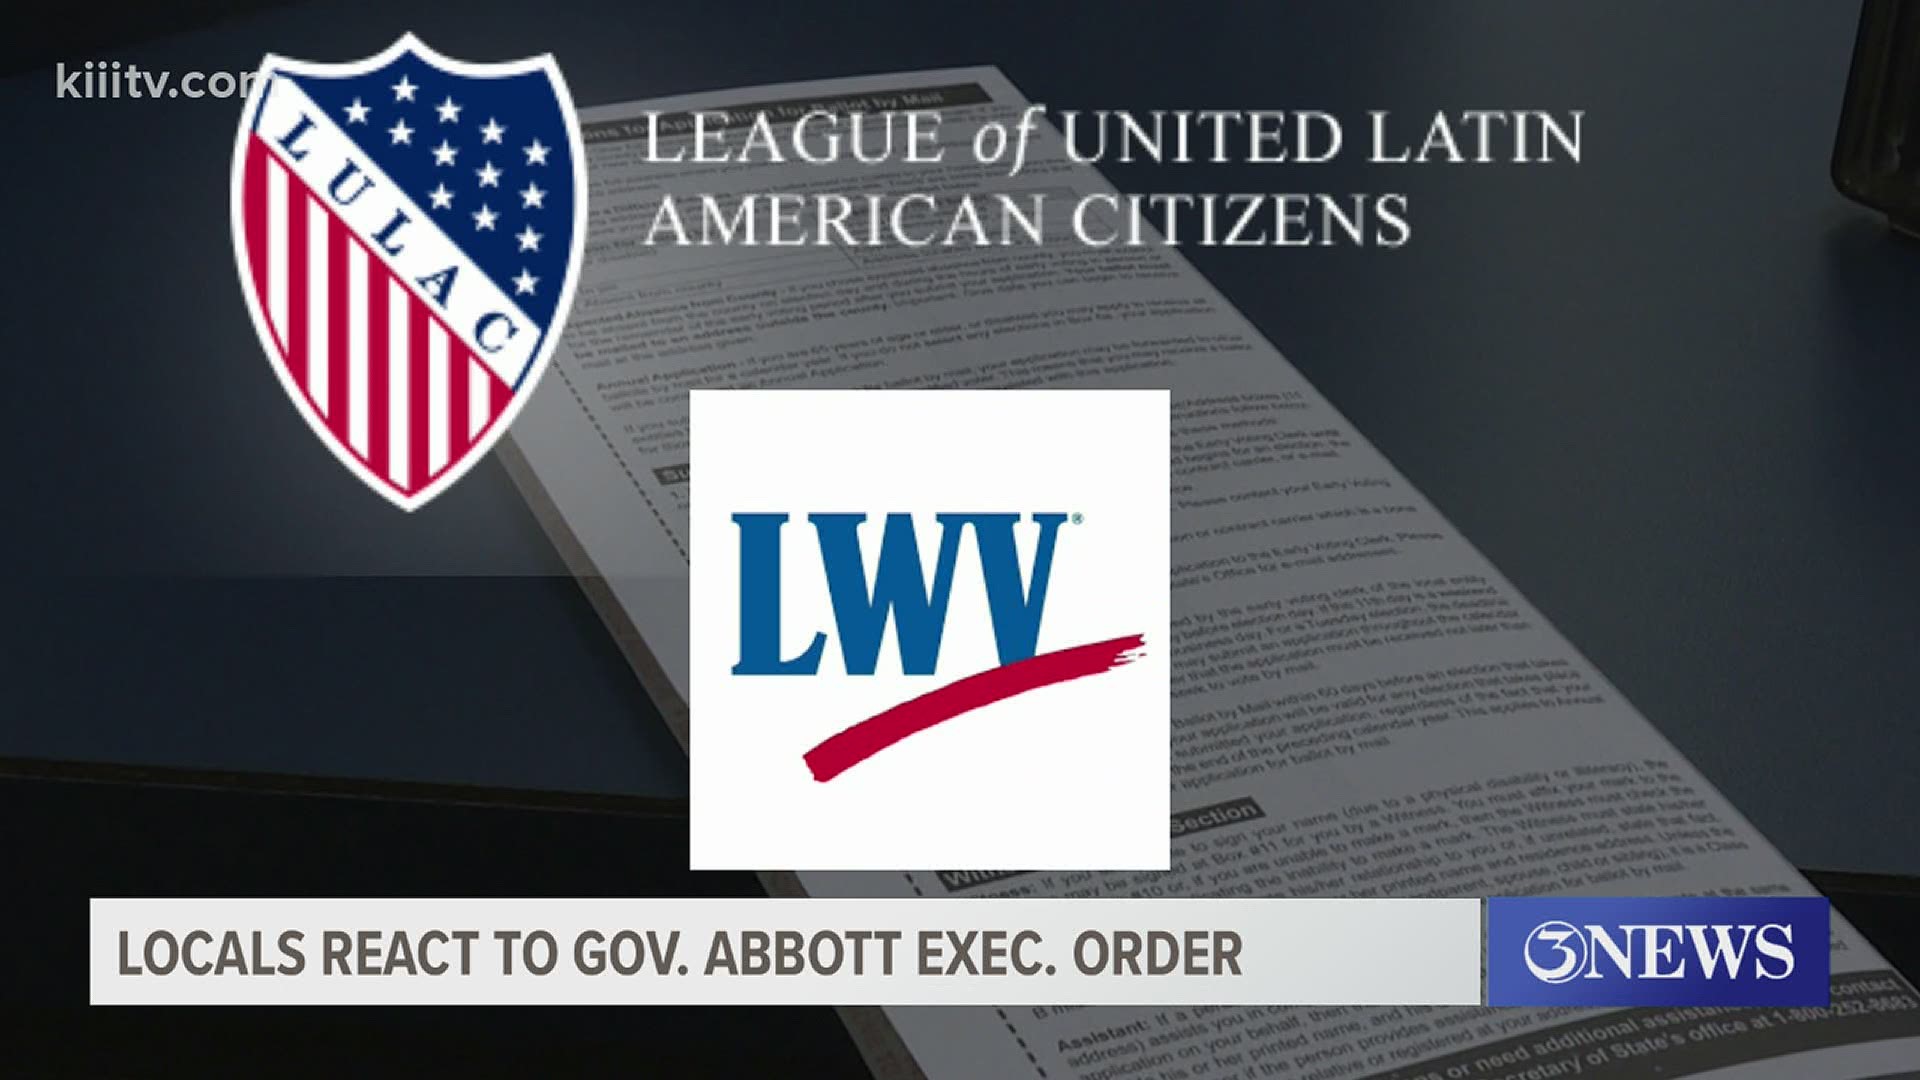 The lawsuits were filed by the League of United Latin American Citizens and the League of Women Voters of Texas and two individual voters.